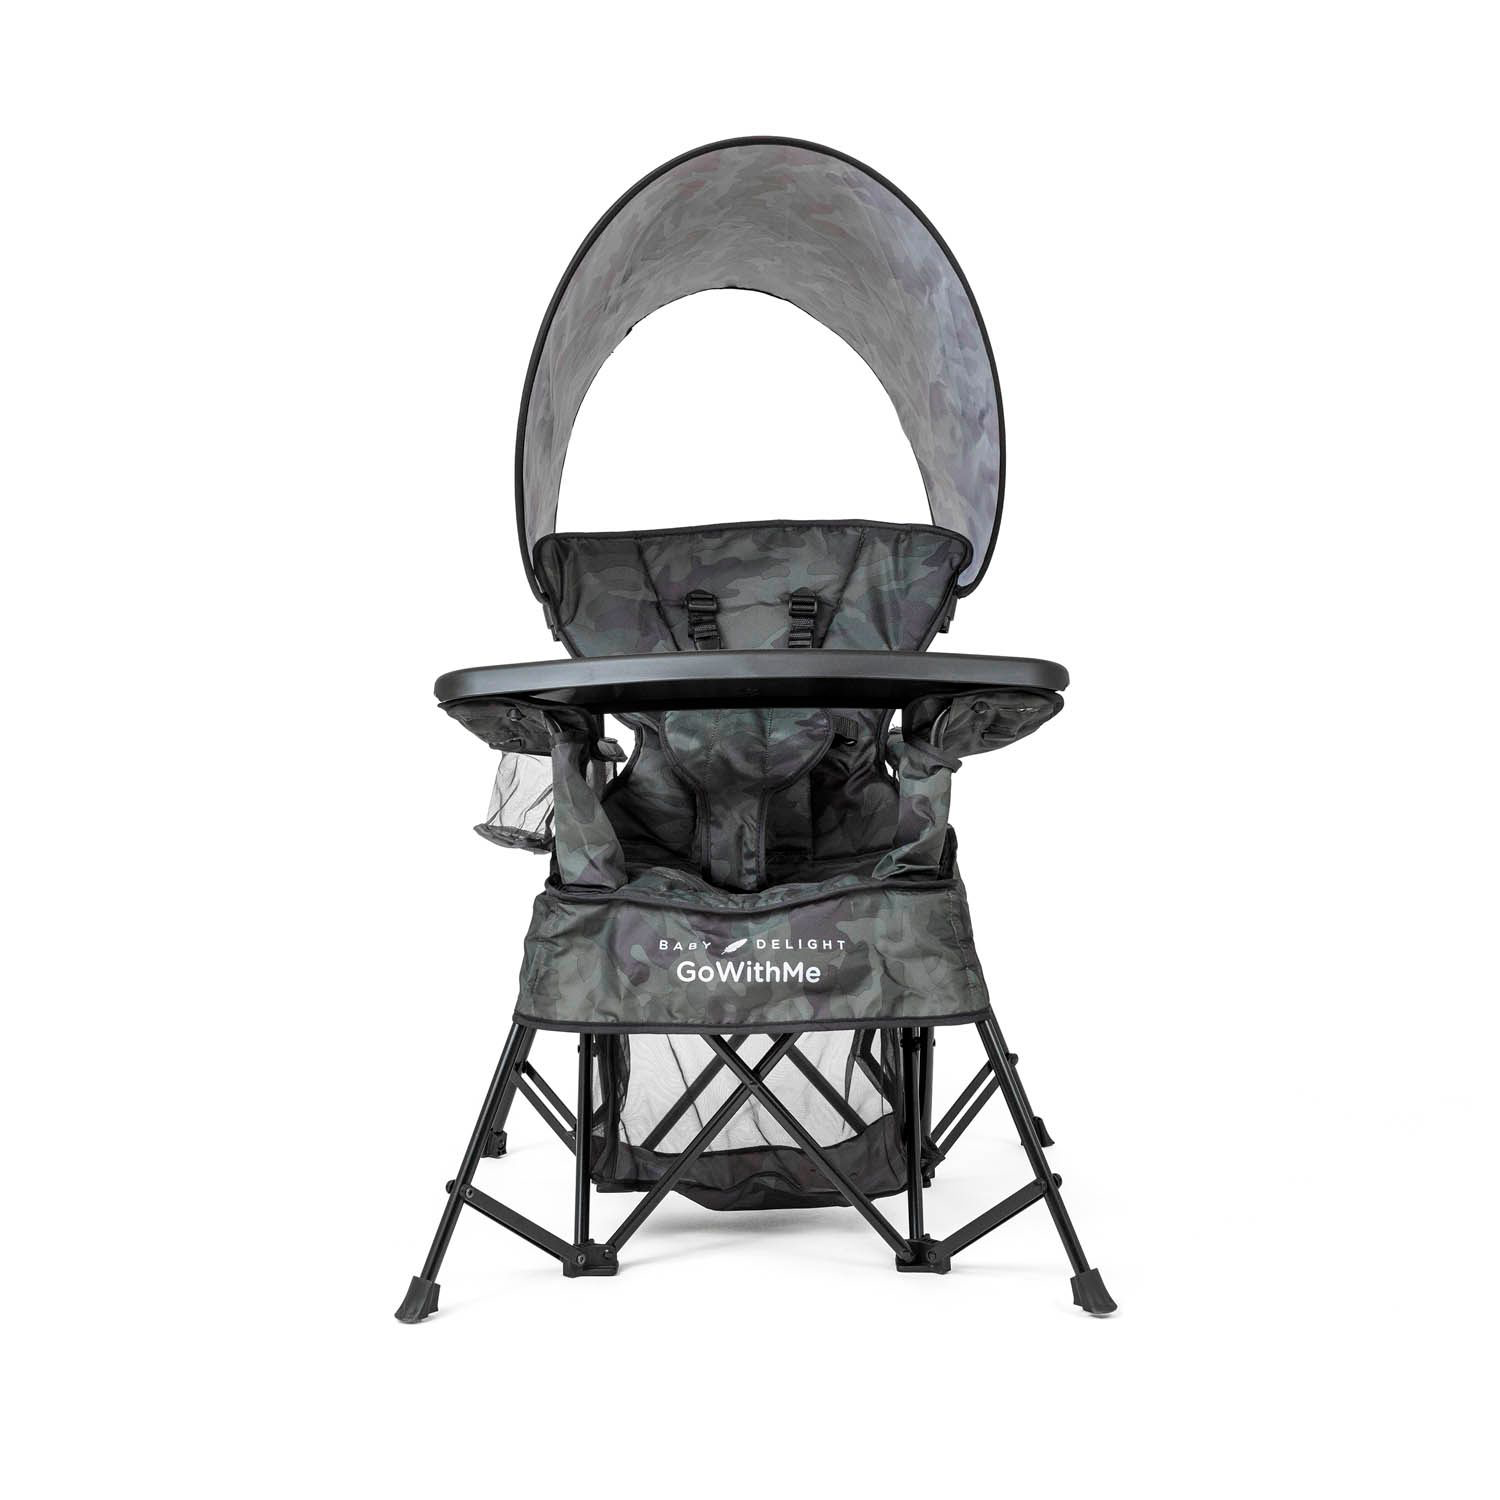 Baby Delight Go With Me Venture Deluxe Portable Chair for Kids - Carbon Camo